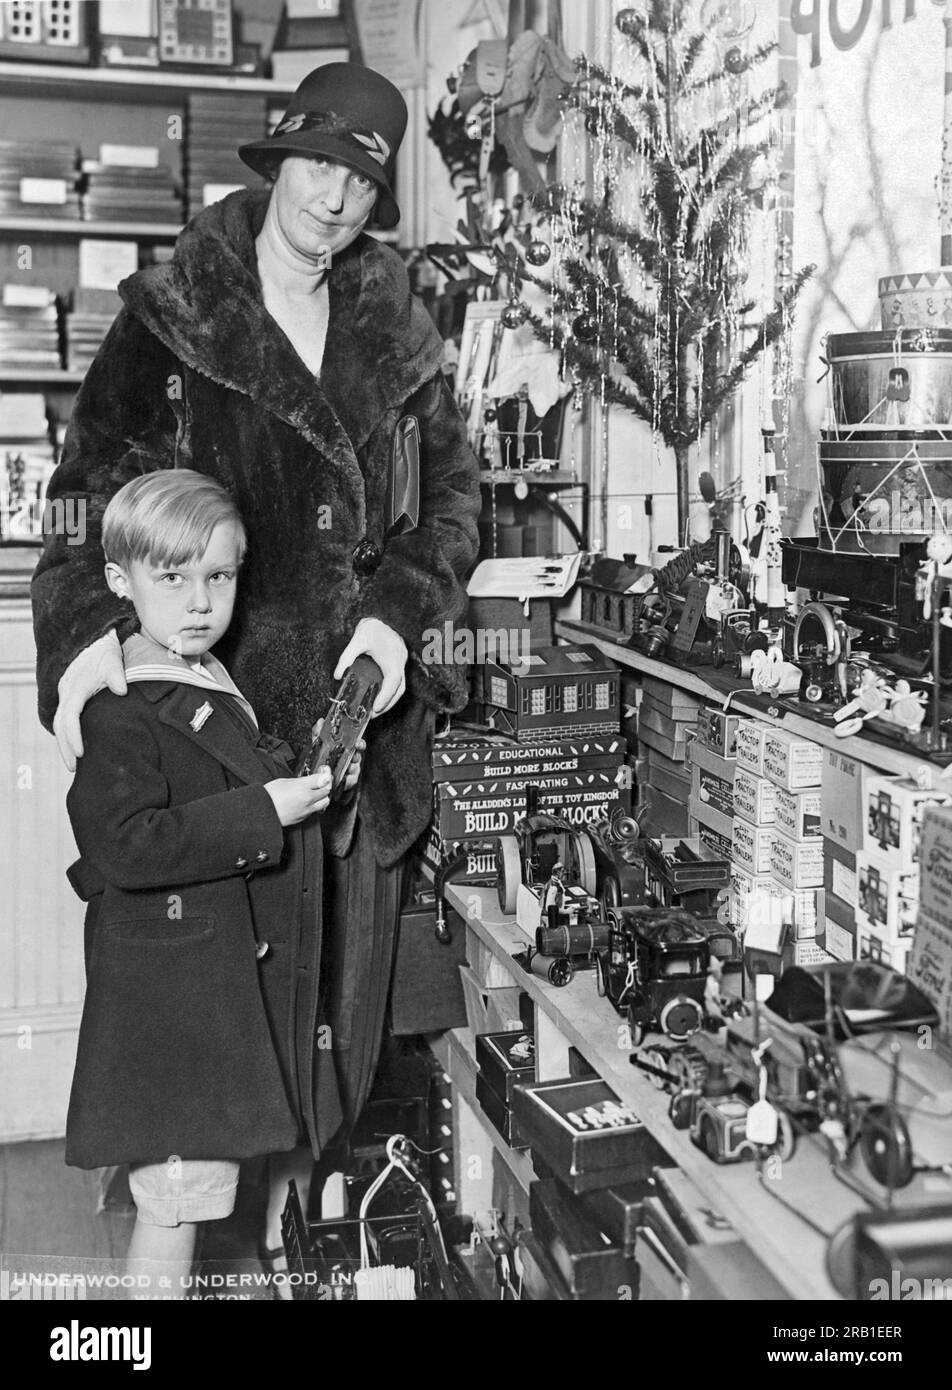 Washington, D.C.: December 5, 1925. Freddie Hicks, son of Alien Property Custodian Hicks, gets an pre-season tour of Toyland with his mother. Stock Photo